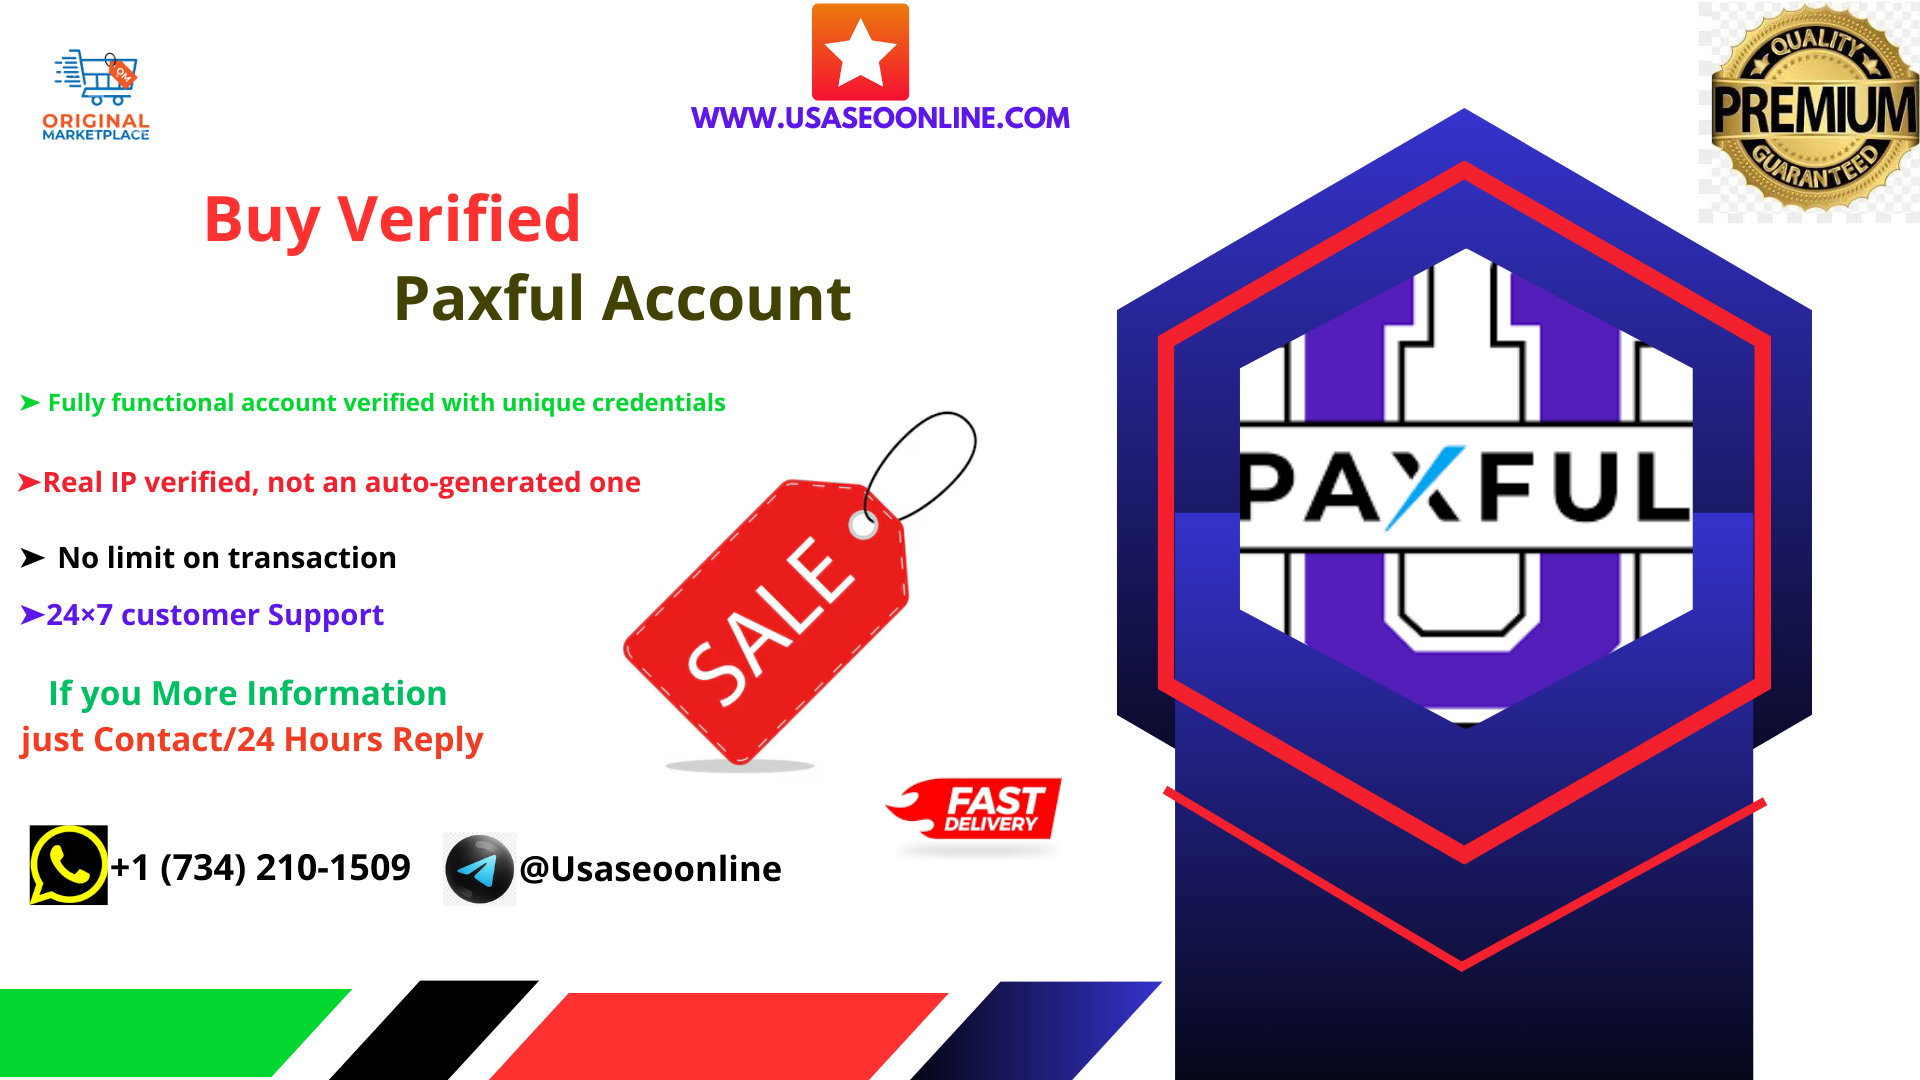 Buy Verified Paxful Account - USA SEO Online